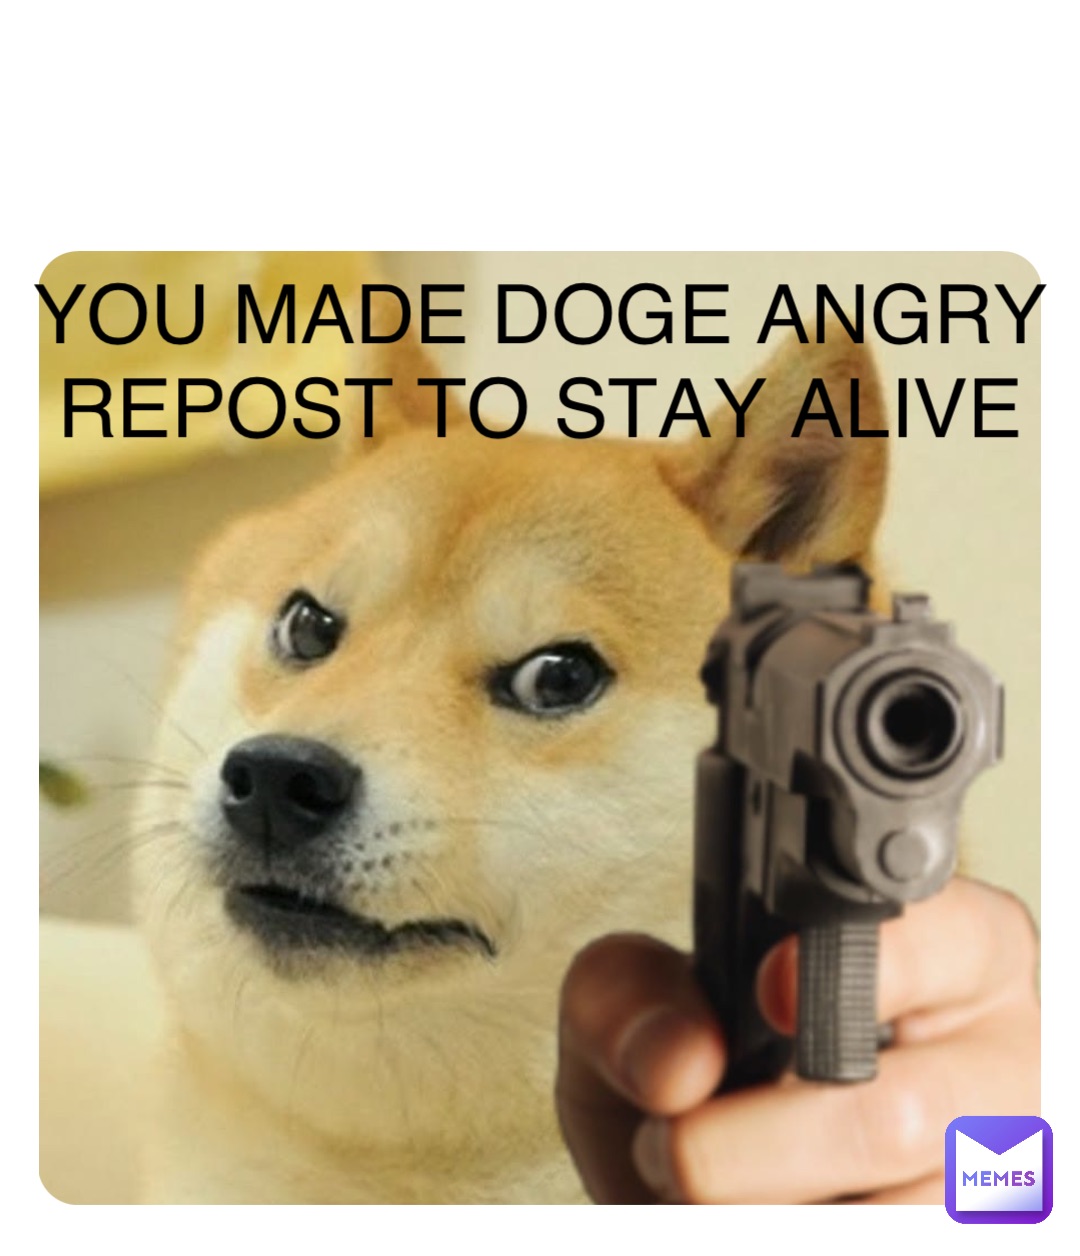 Double tap to edit YOU MADE DOGE ANGRY
REPOST TO STAY ALIVE